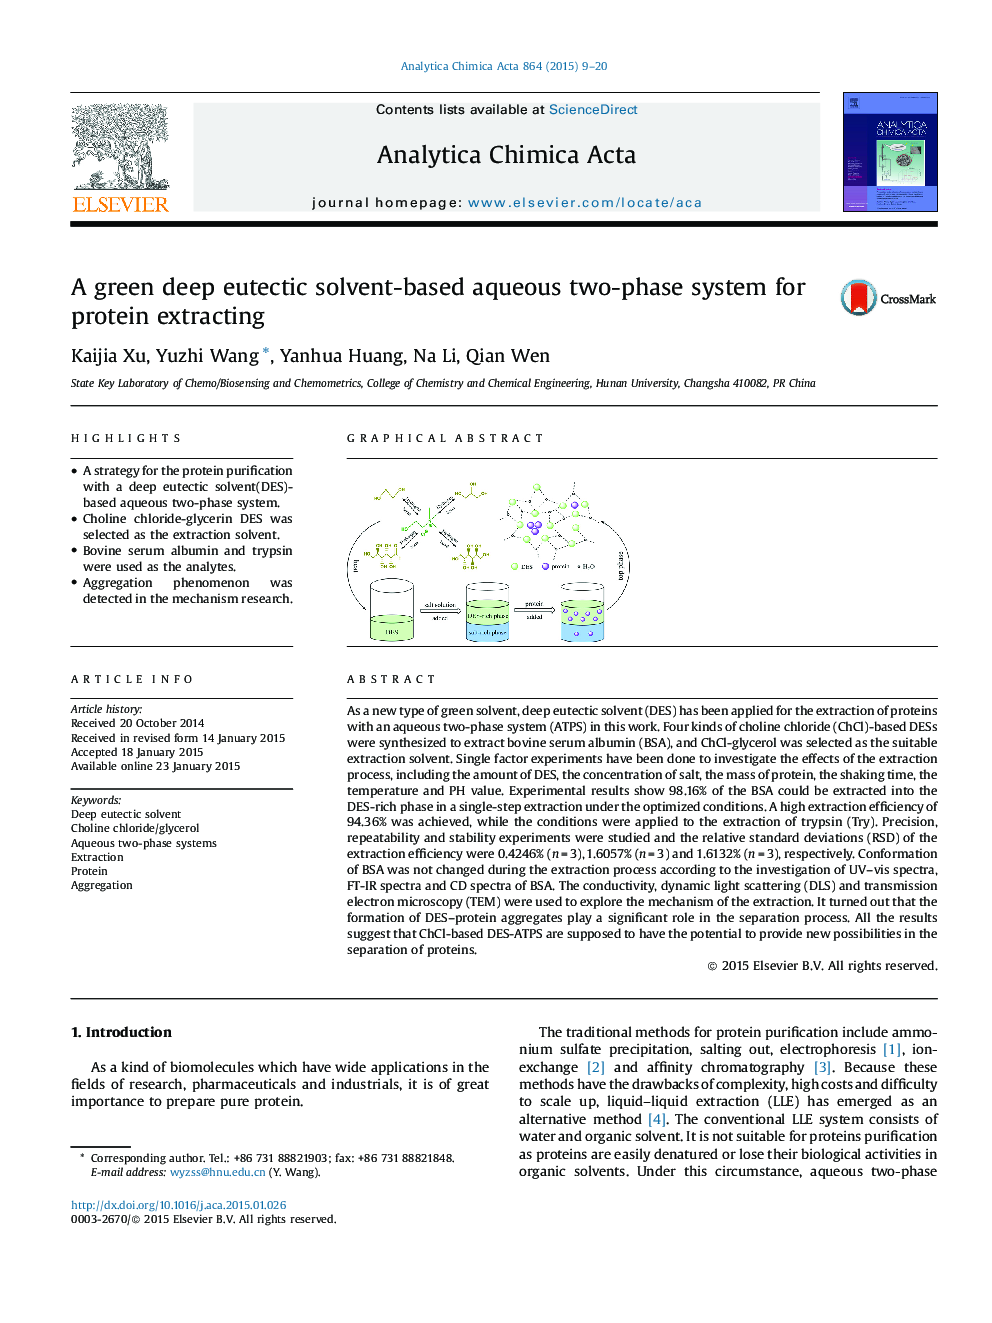 A green deep eutectic solvent-based aqueous two-phase system for protein extracting